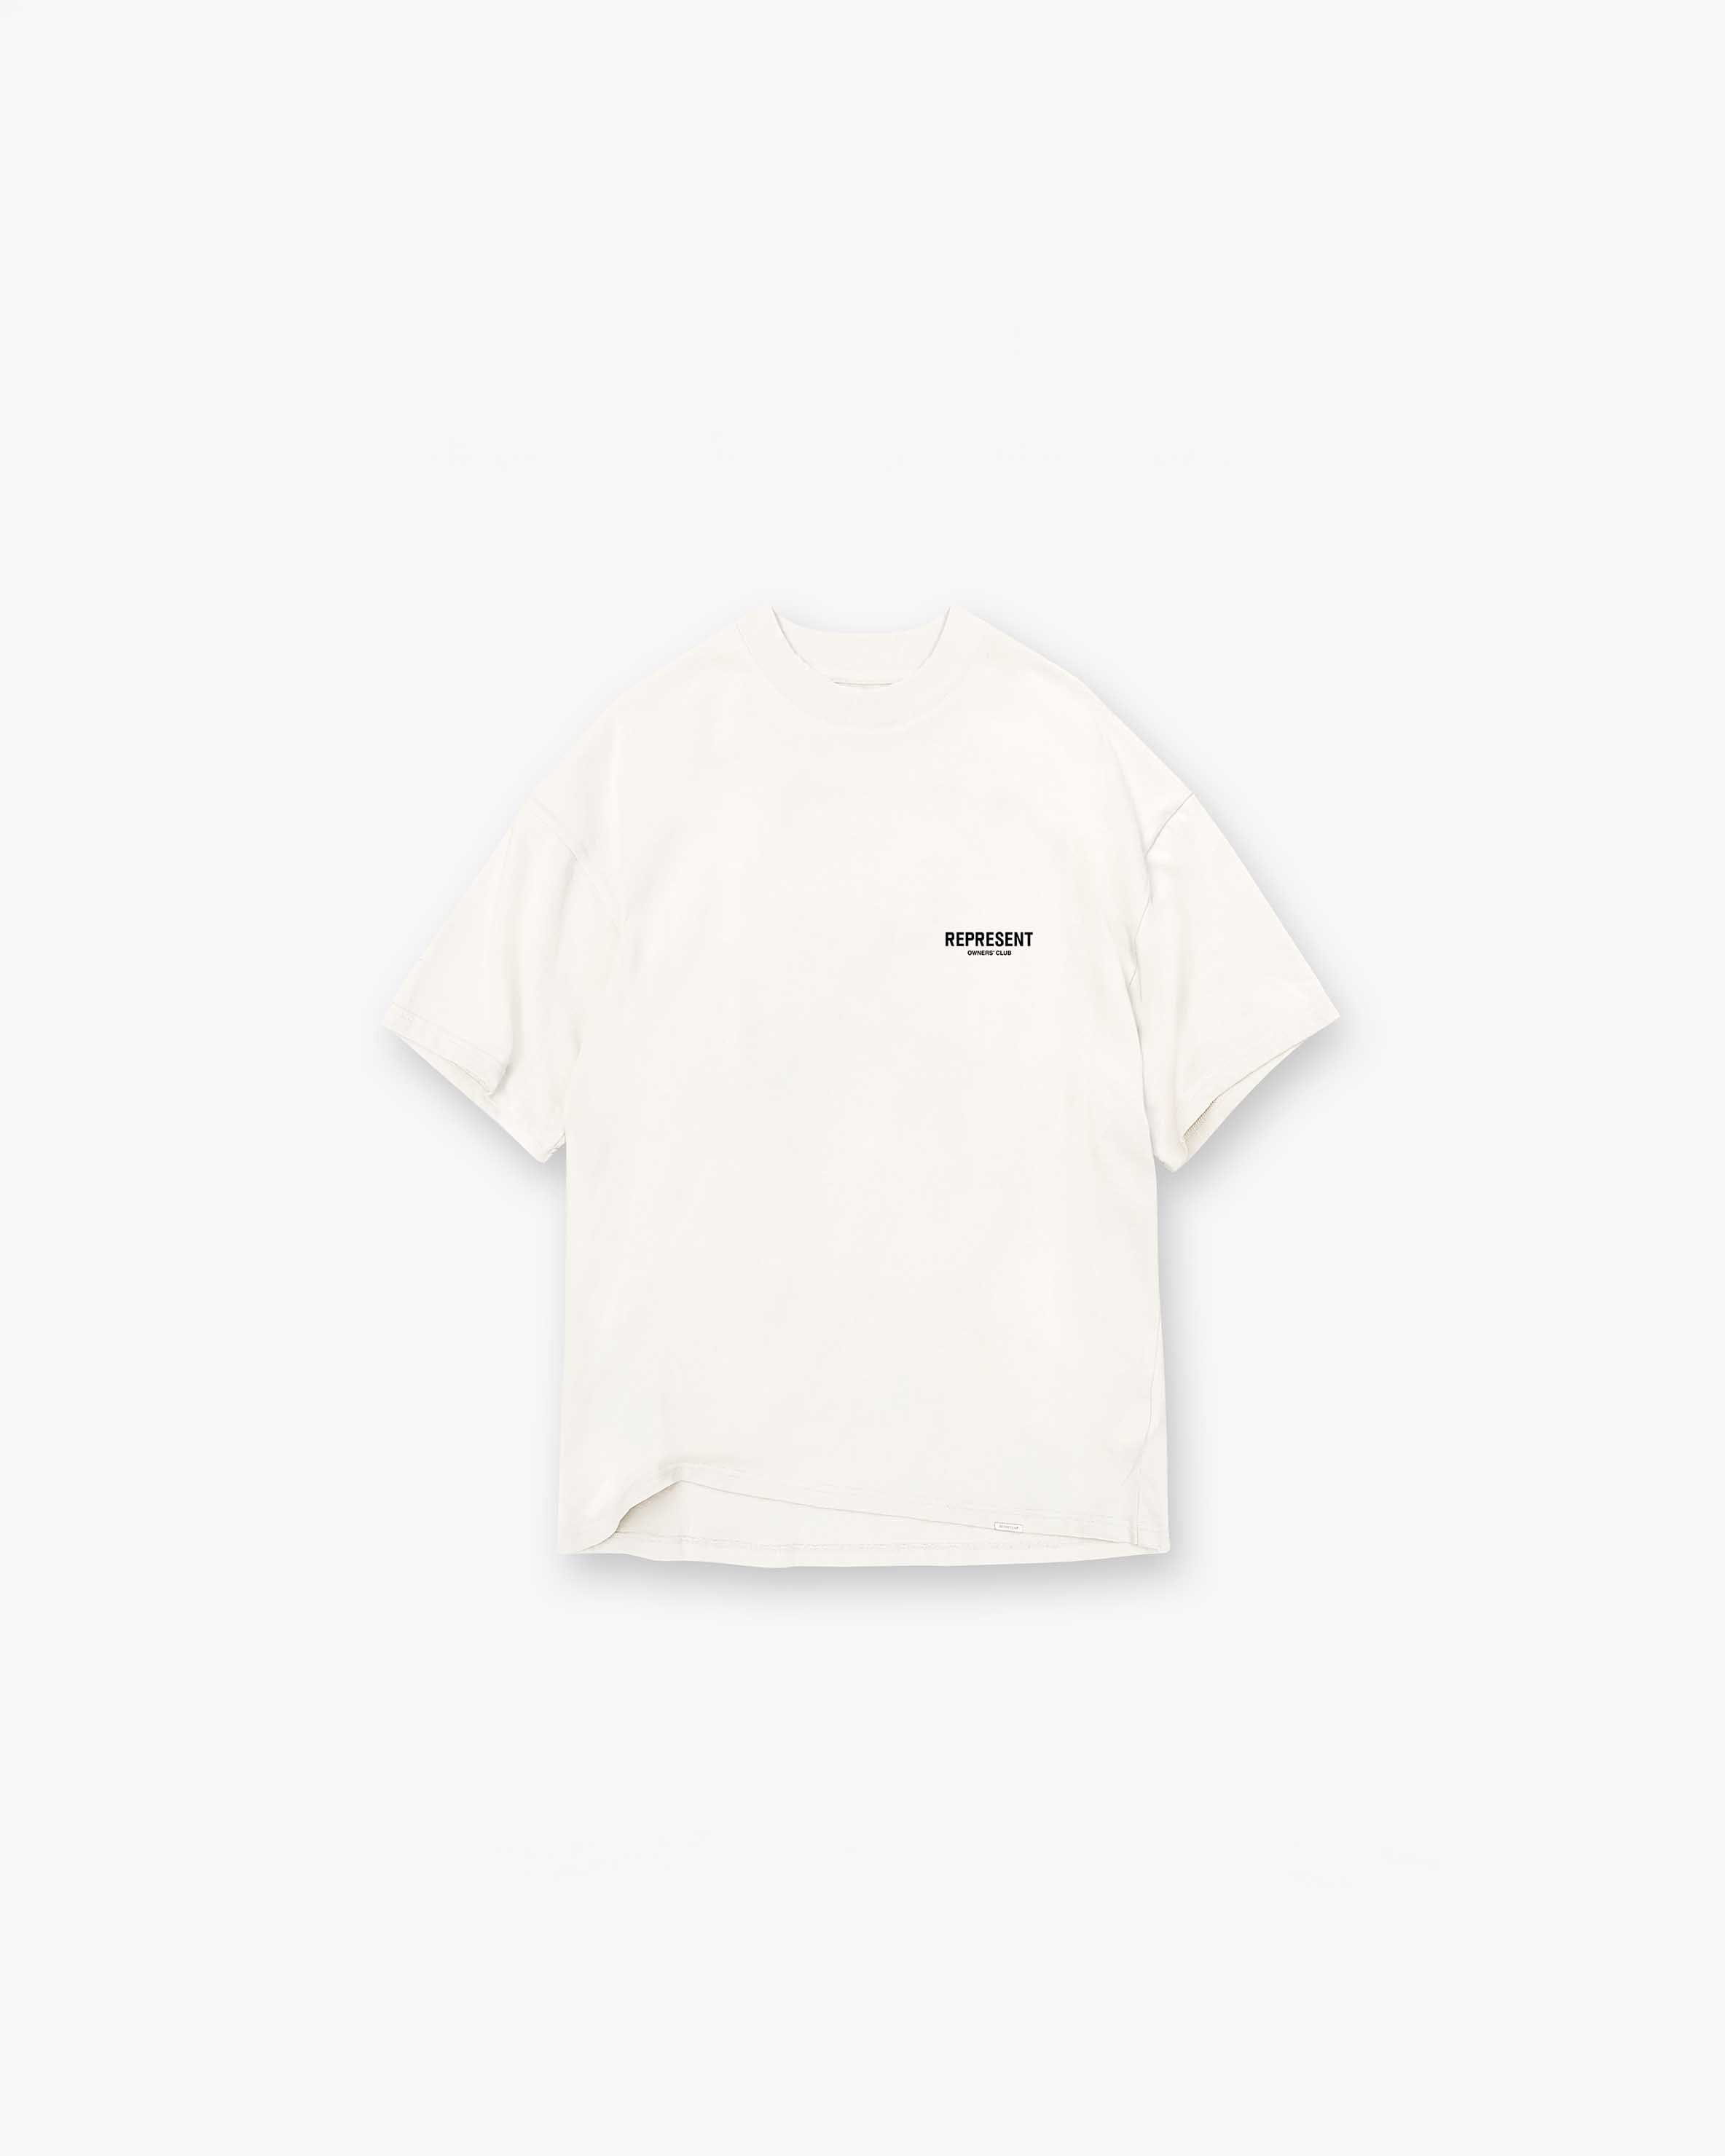 Flat White T-Shirt | Owners Club | REPRESENT CLO